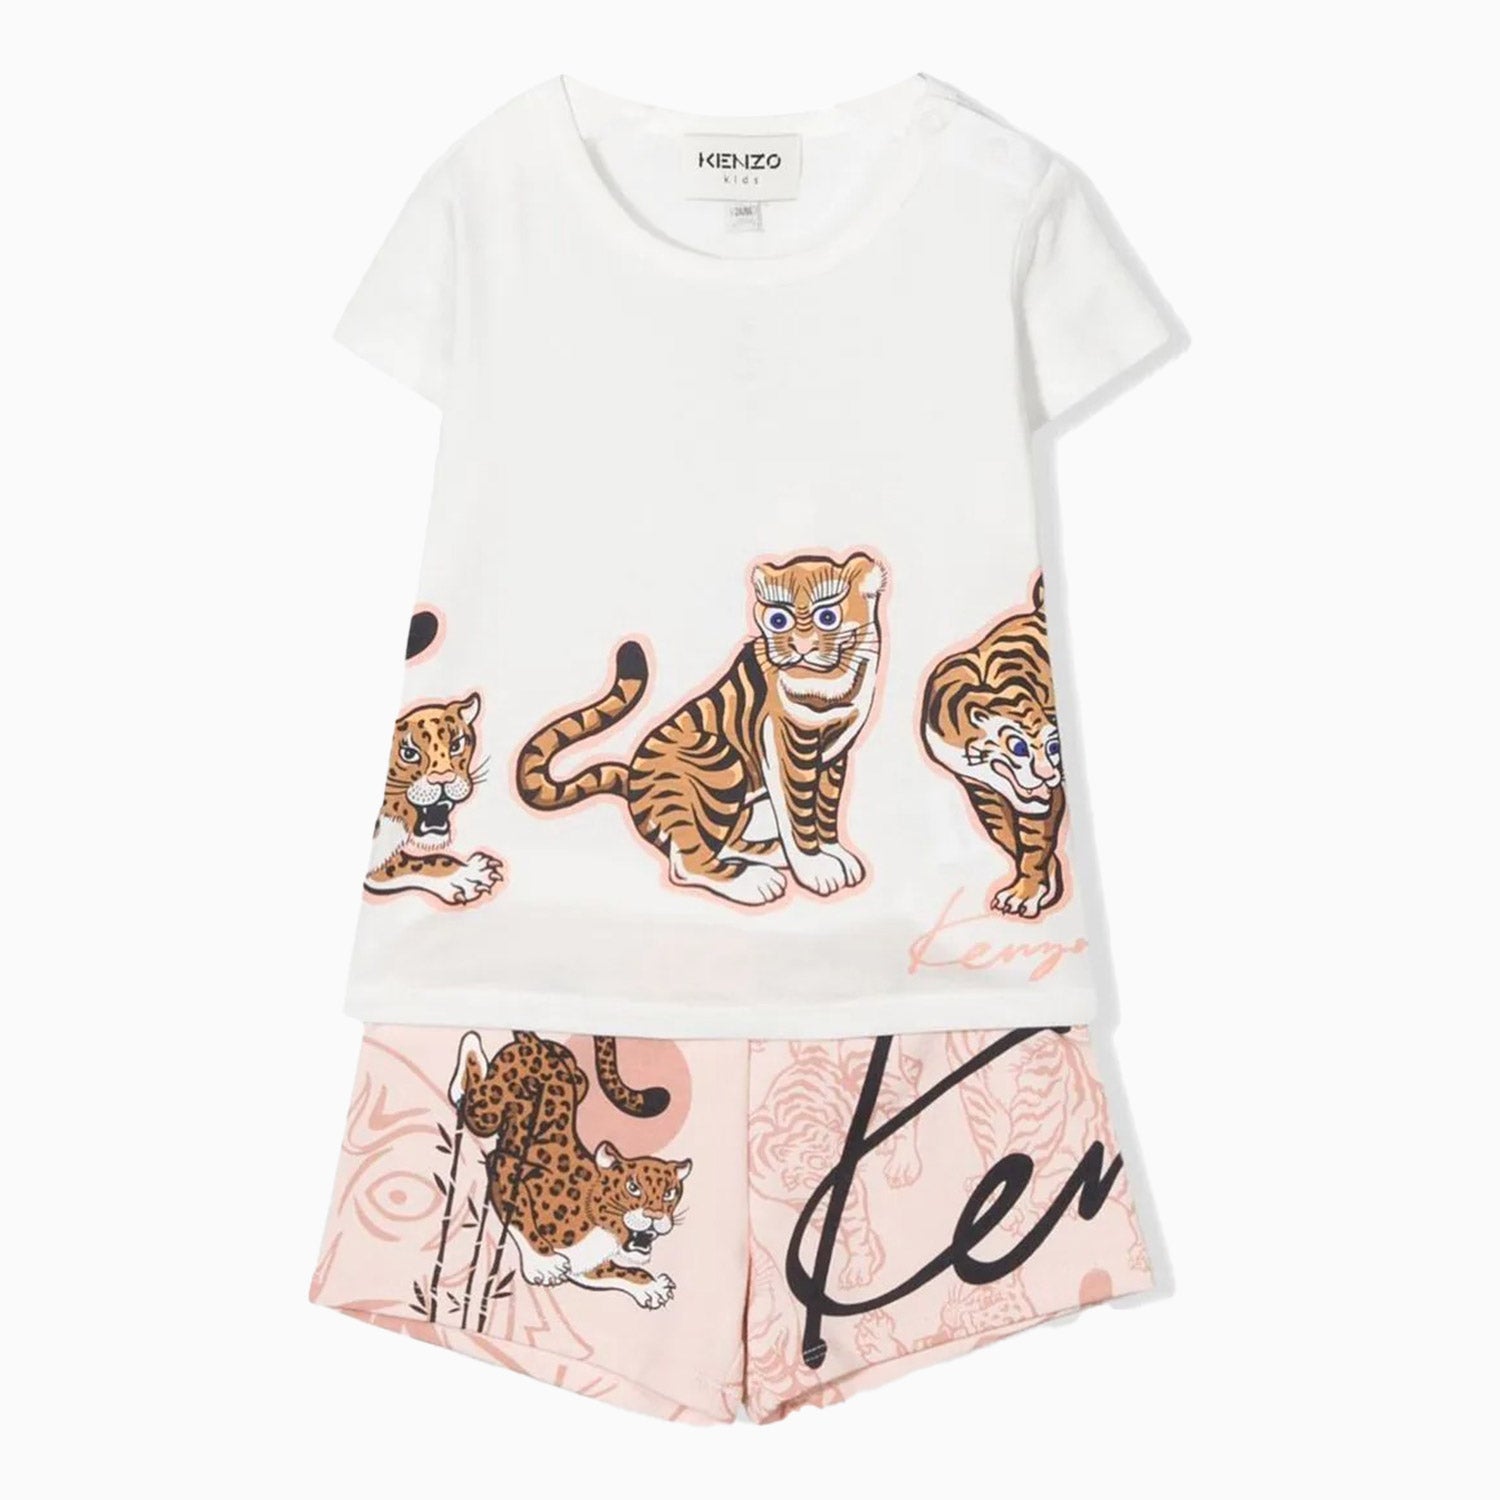 kenzo-kids-tiger-print-outfit-toddlers-k08038-471